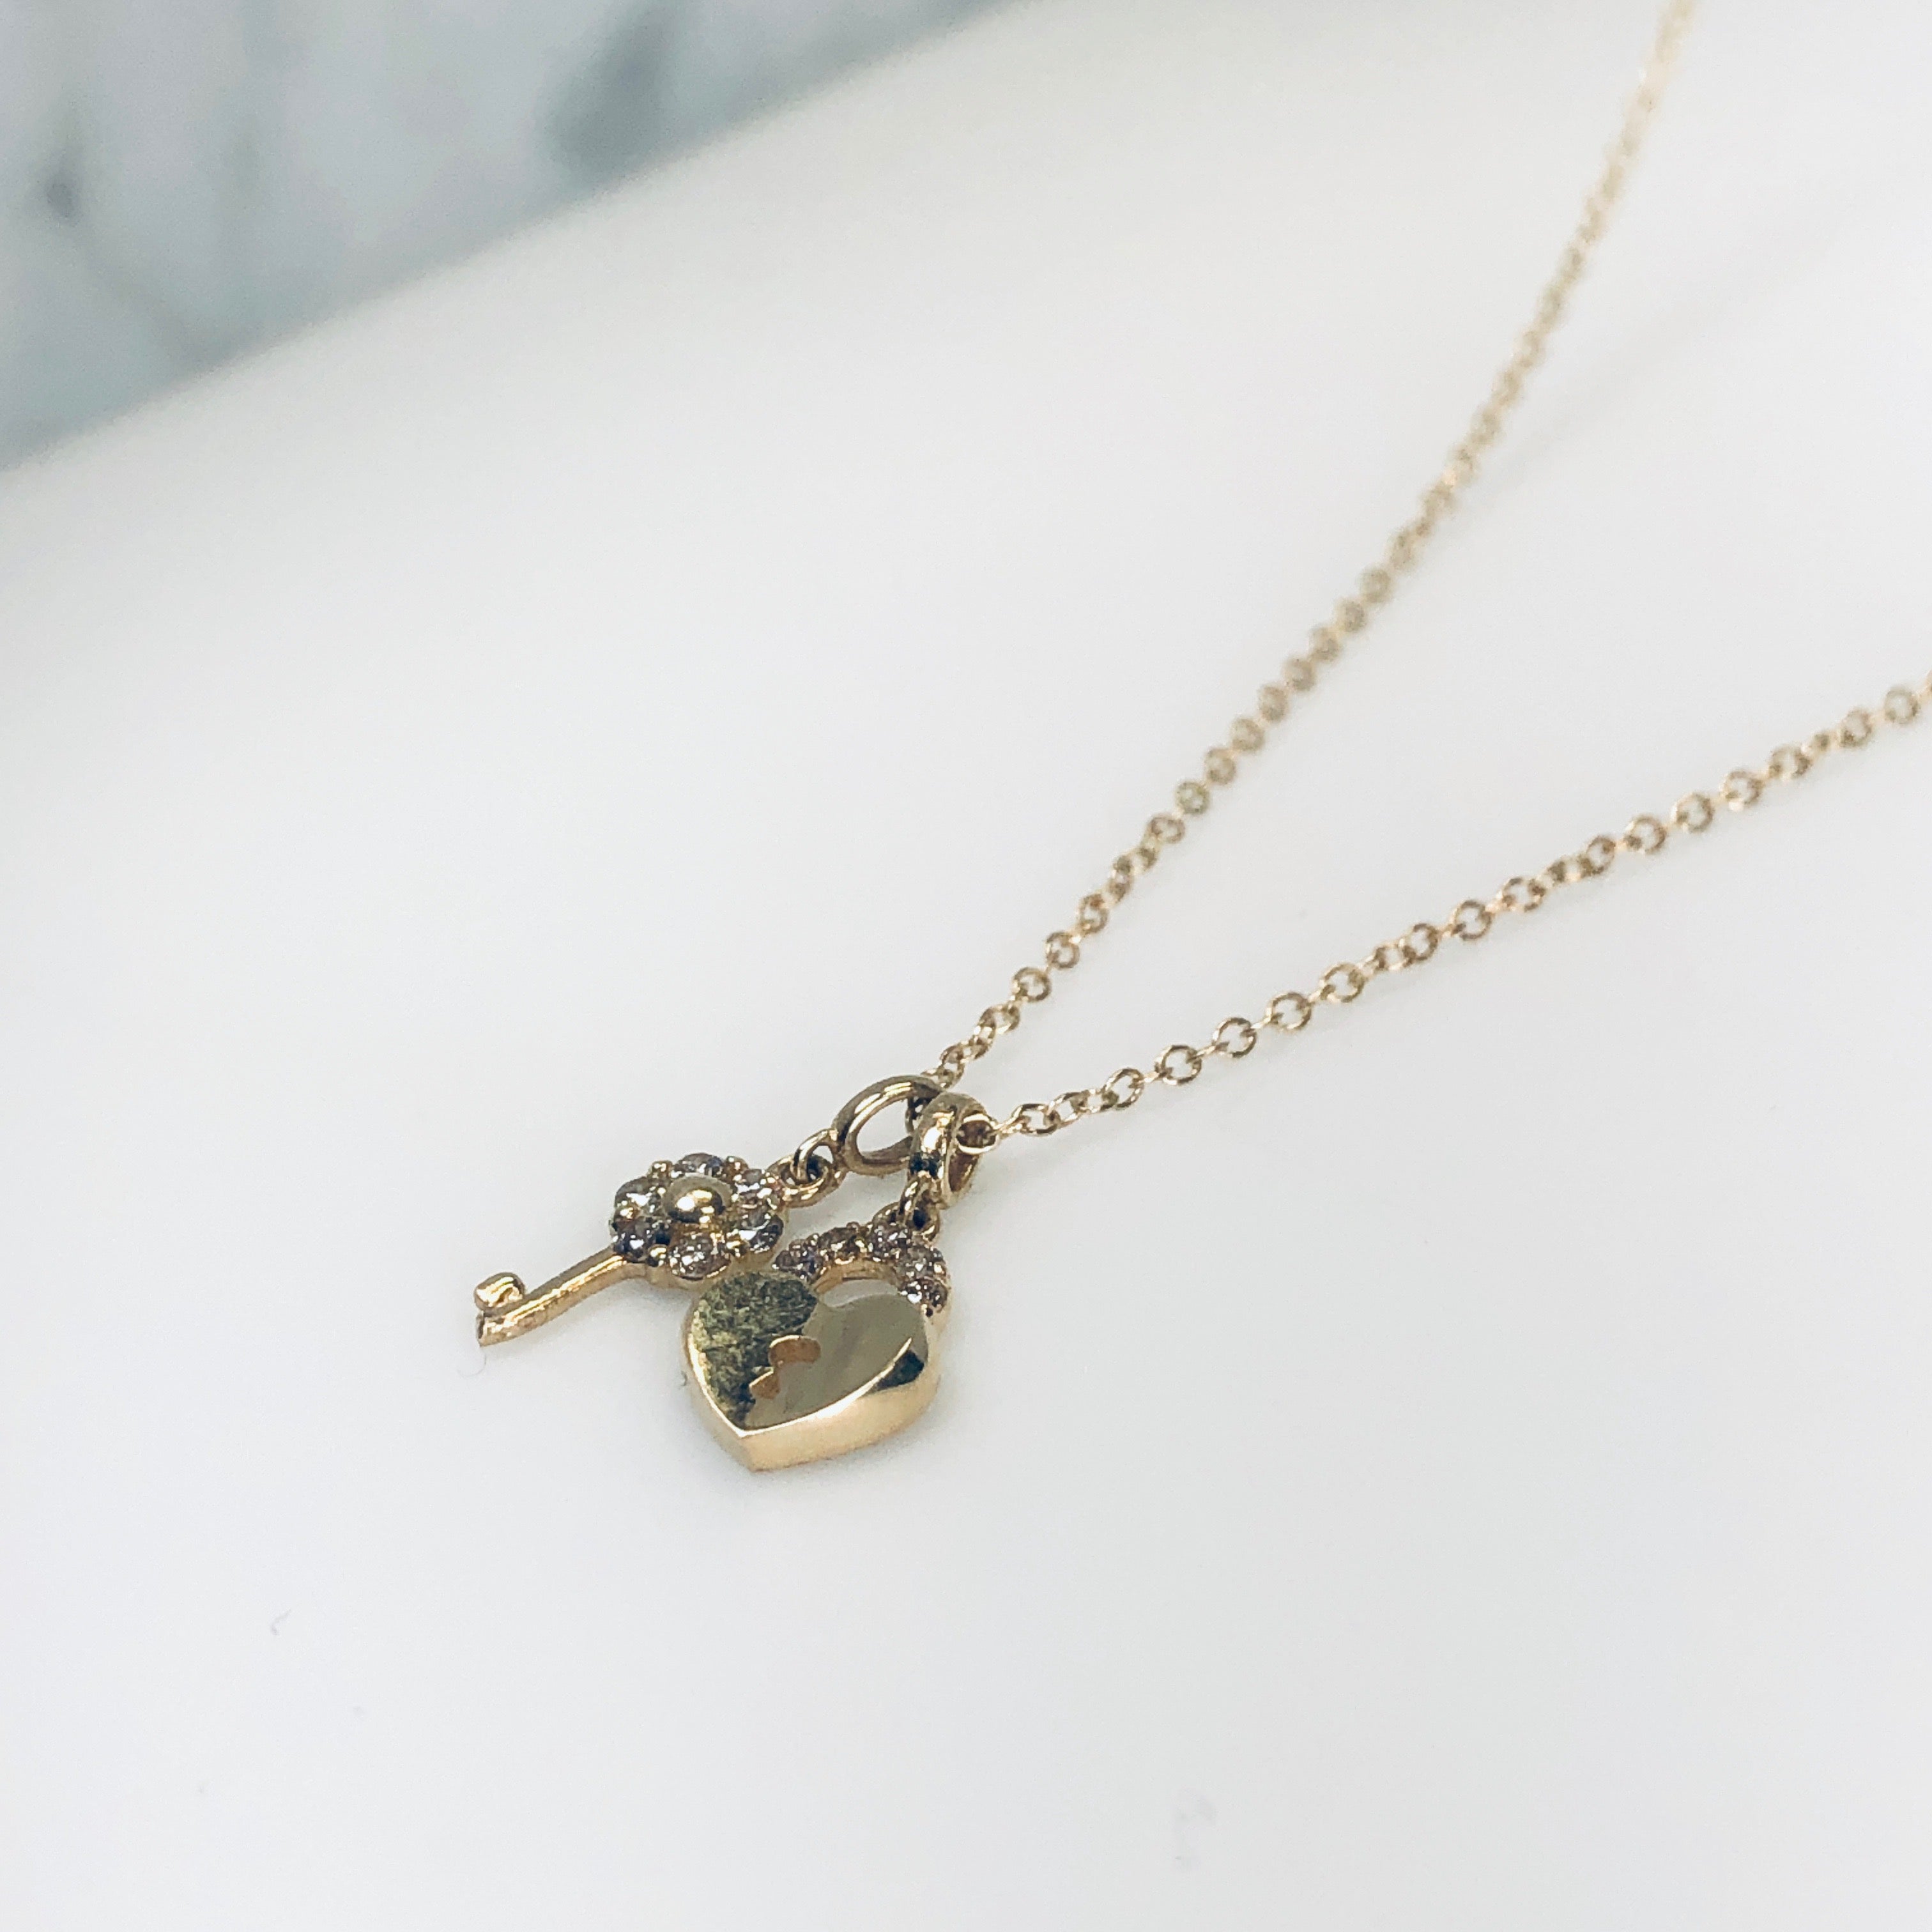 WD609 - Pave Key and Heart Lock necklace